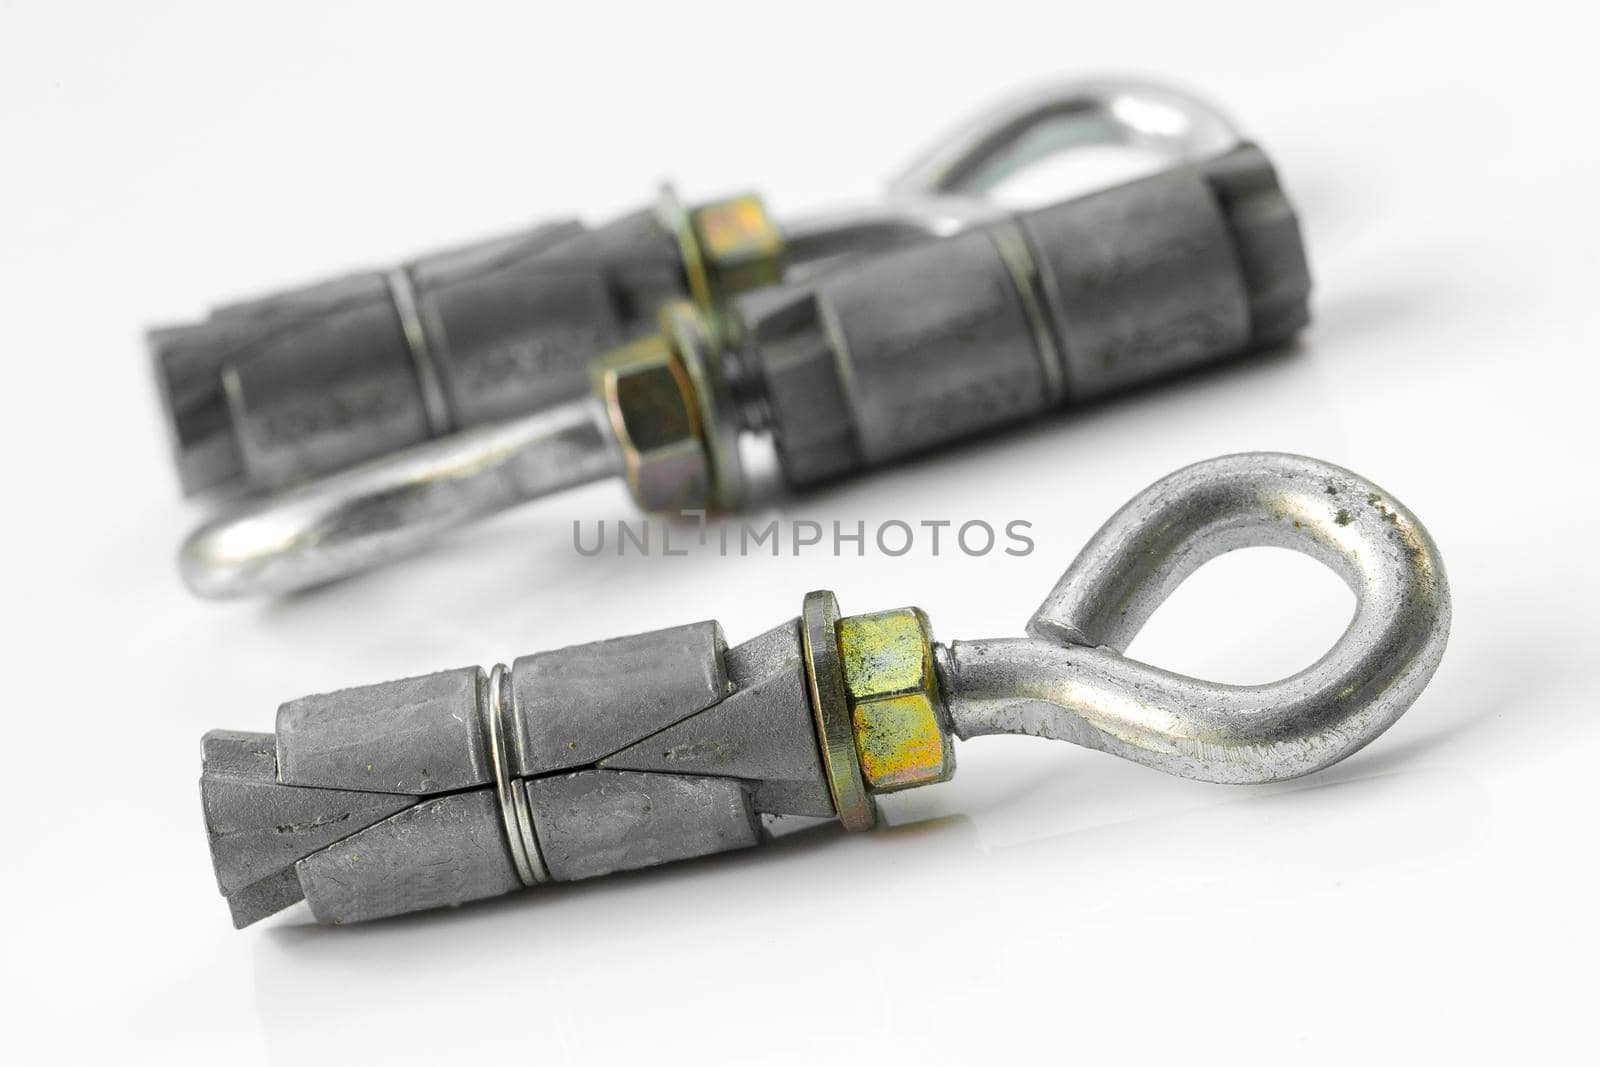 Anchor bolts, steel tools for construction on a white background